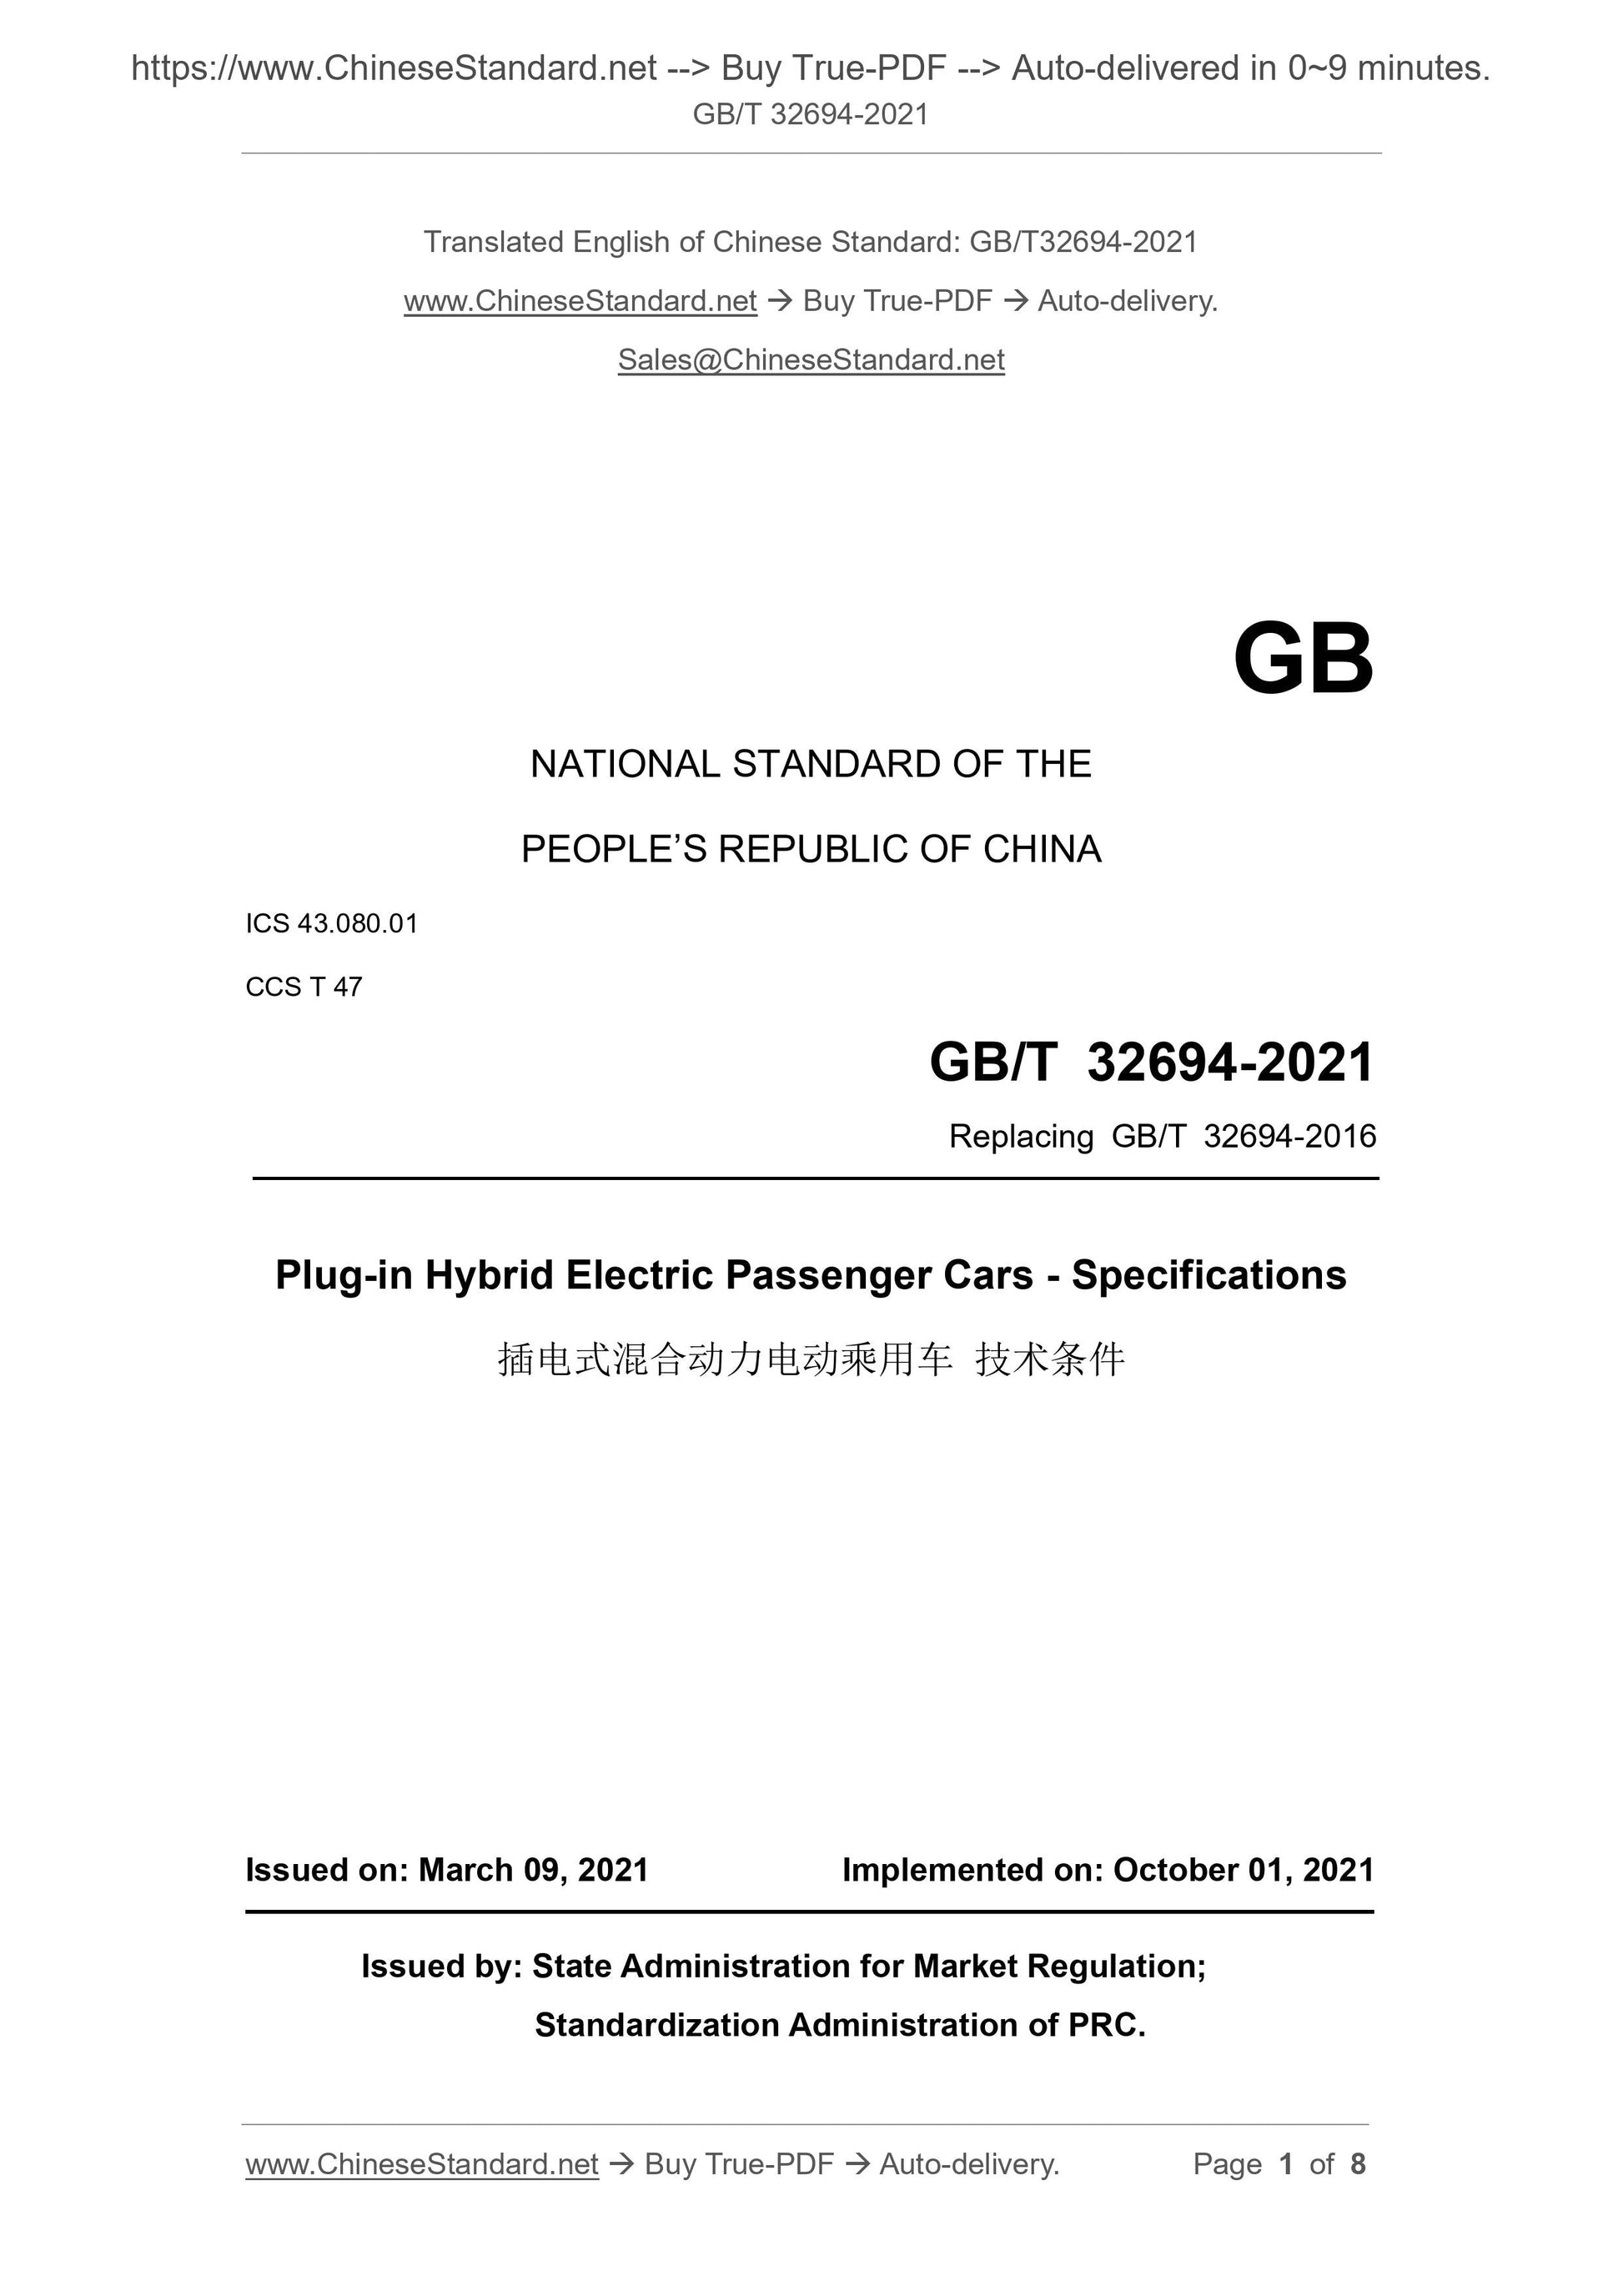 GB/T 32694-2021 Page 1